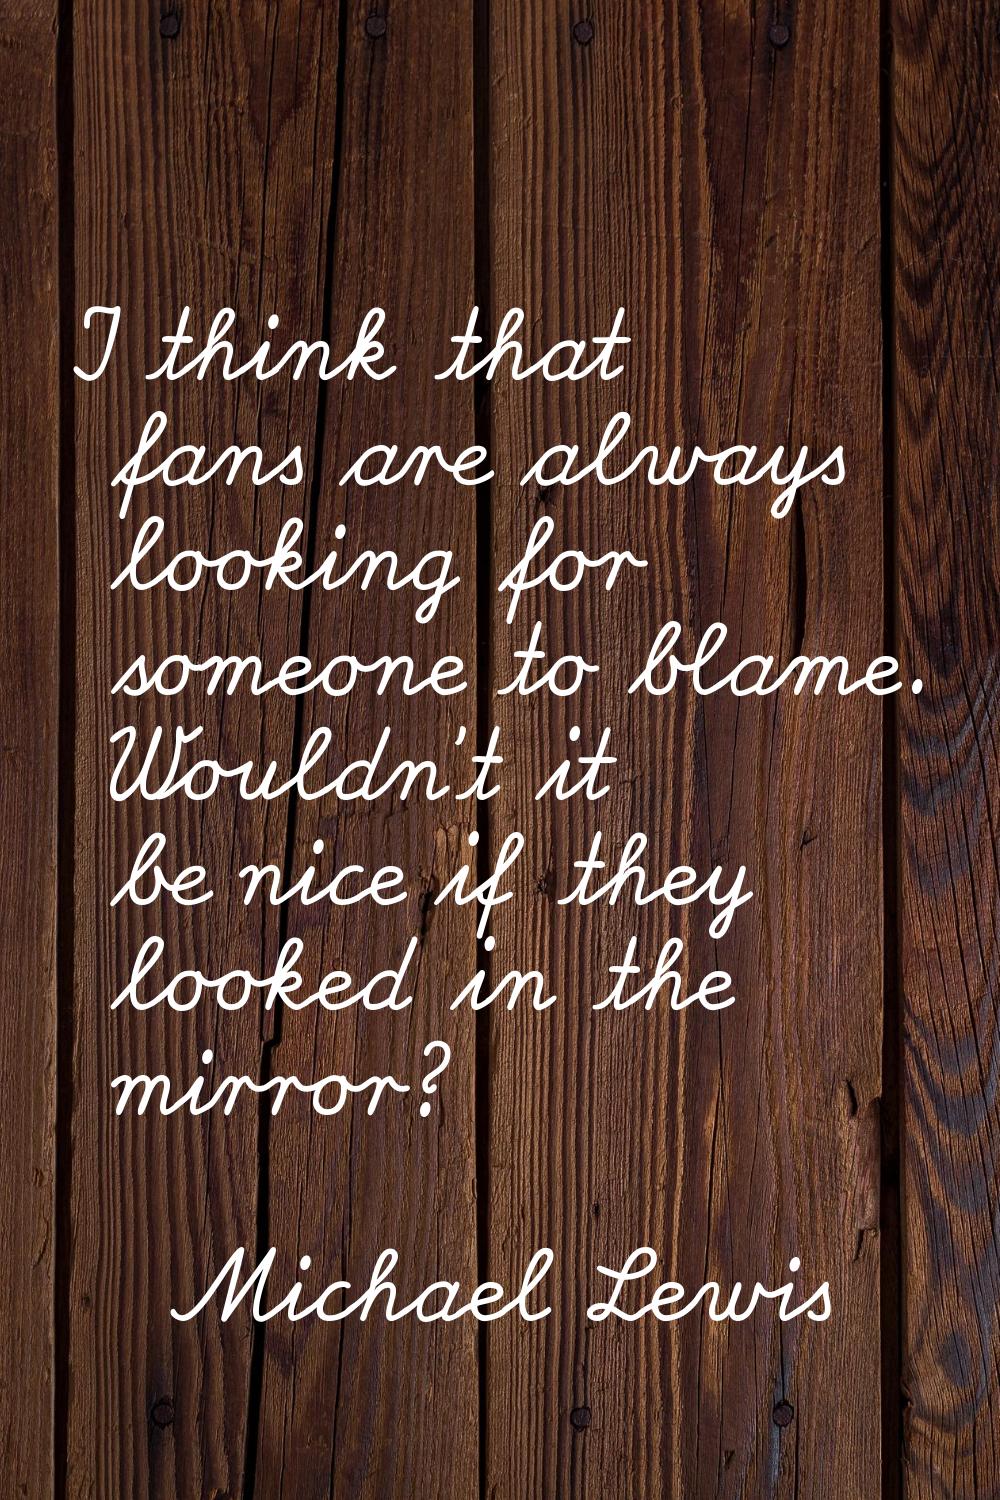 I think that fans are always looking for someone to blame. Wouldn't it be nice if they looked in th